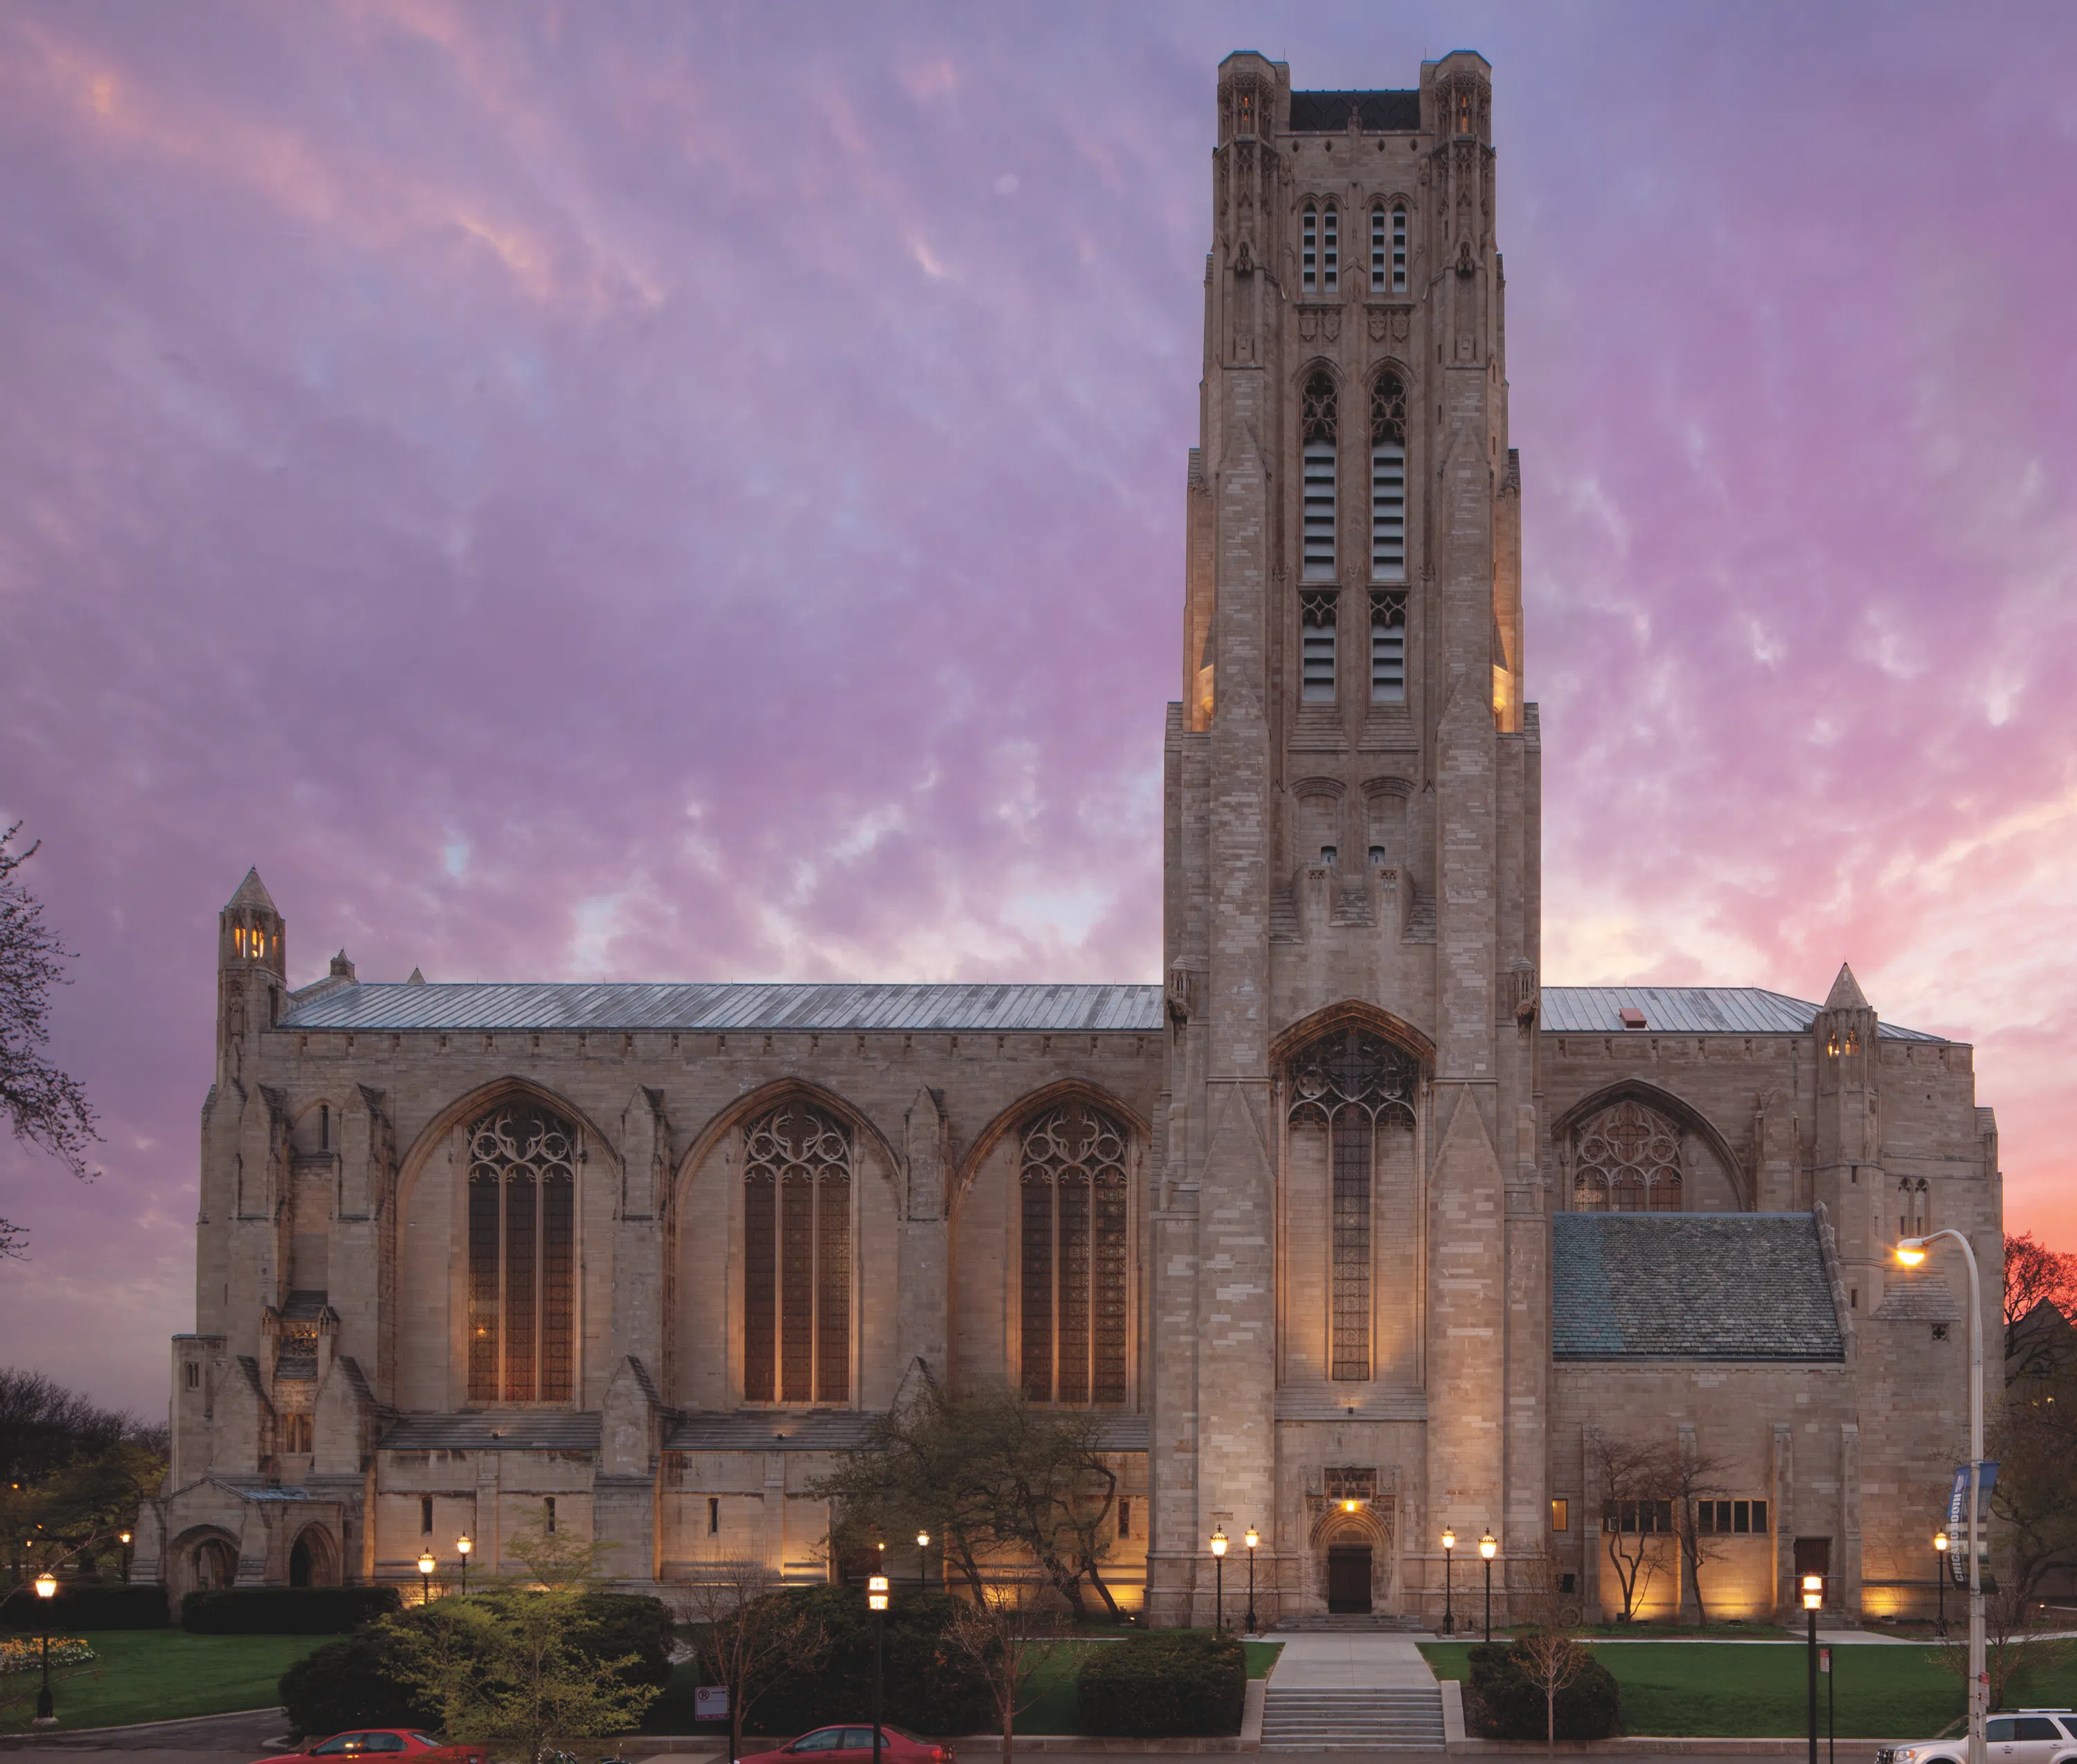 Rockefeller chapel viewed from the east at sunset